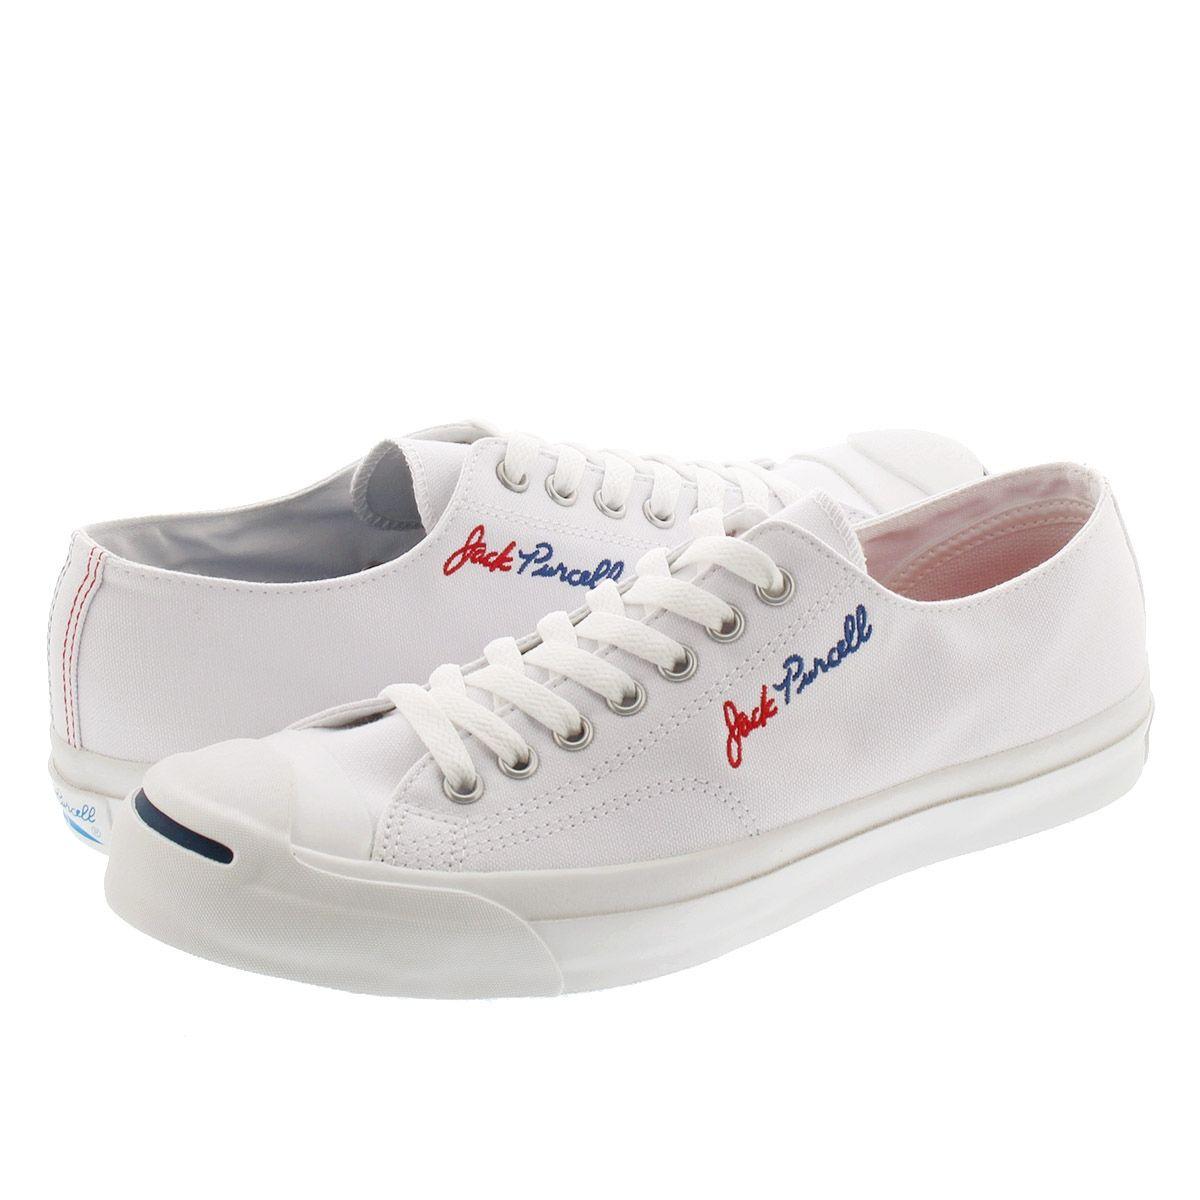 Purcell Logo - CONVERSE JACK PURCELL LOGOSTITCH RH Converse Jack Pursel logo stitch RH  WHITE 33300050